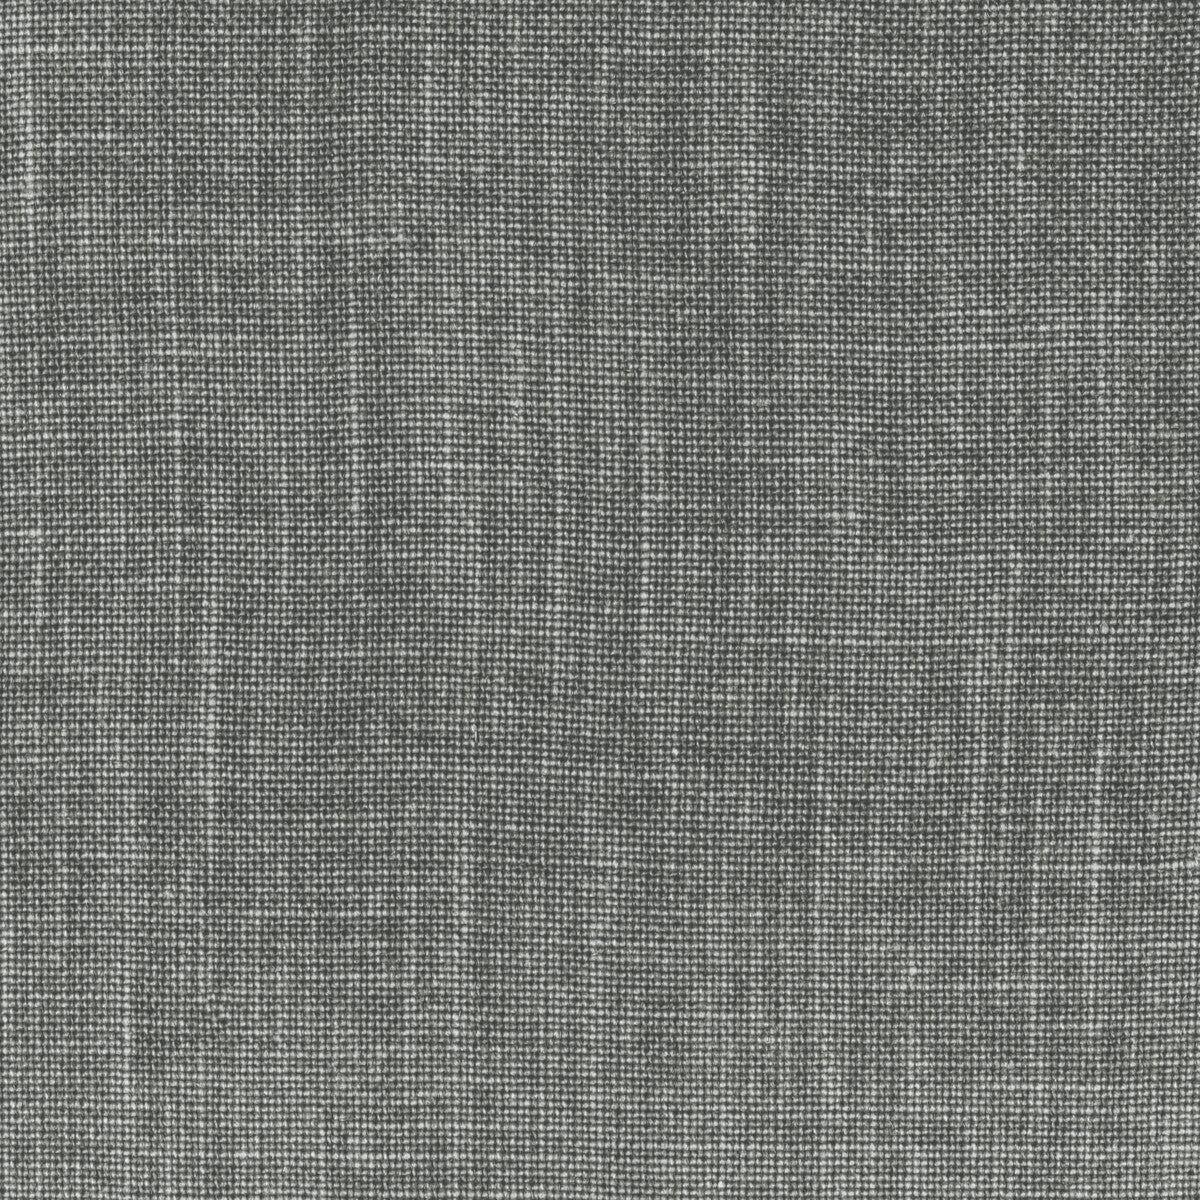 Weathered Linen fabric in slate color - pattern BF10962.940.0 - by G P &amp; J Baker in the Baker House Linens collection